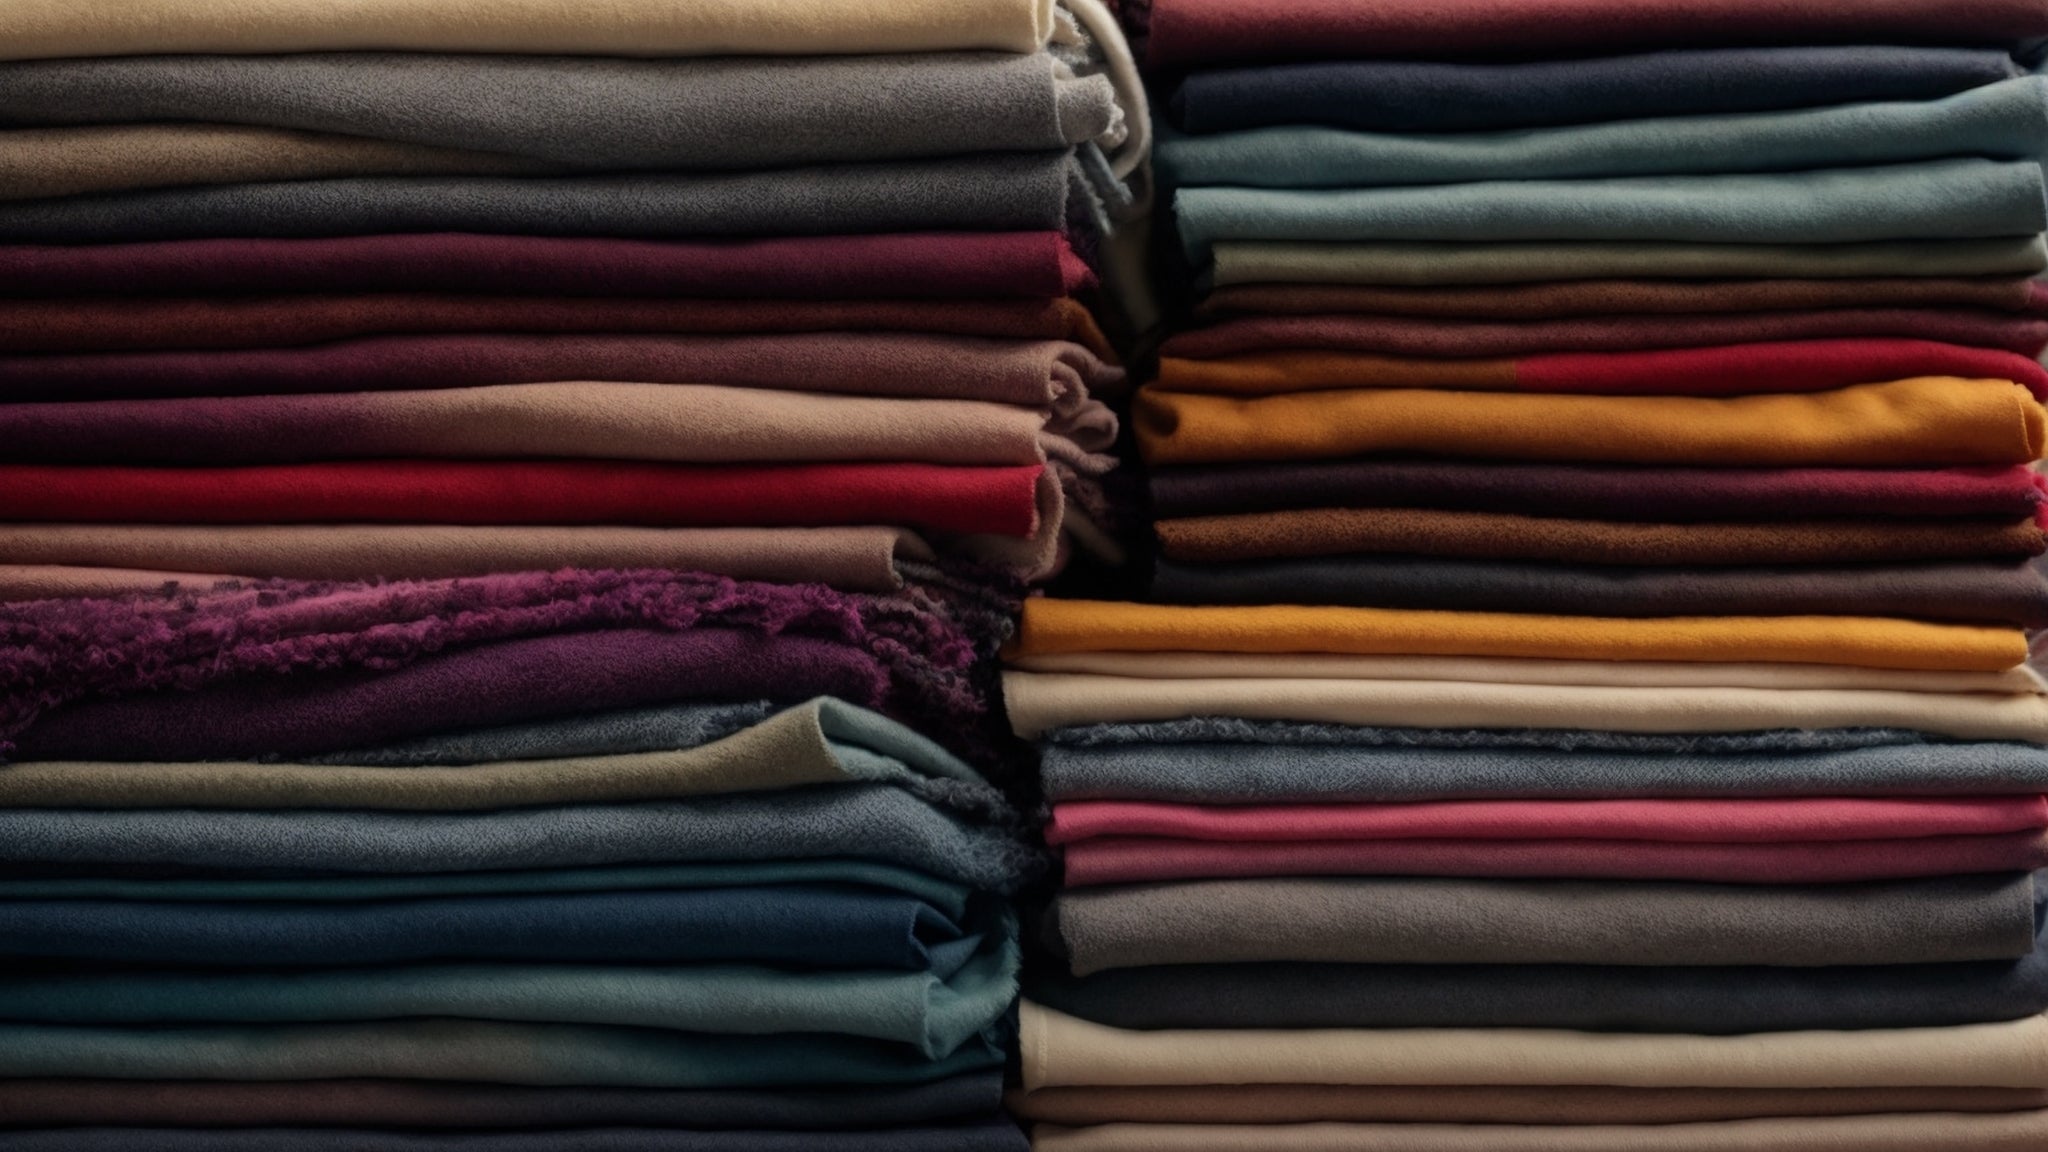 Clothing Care Tips for All Fabrics